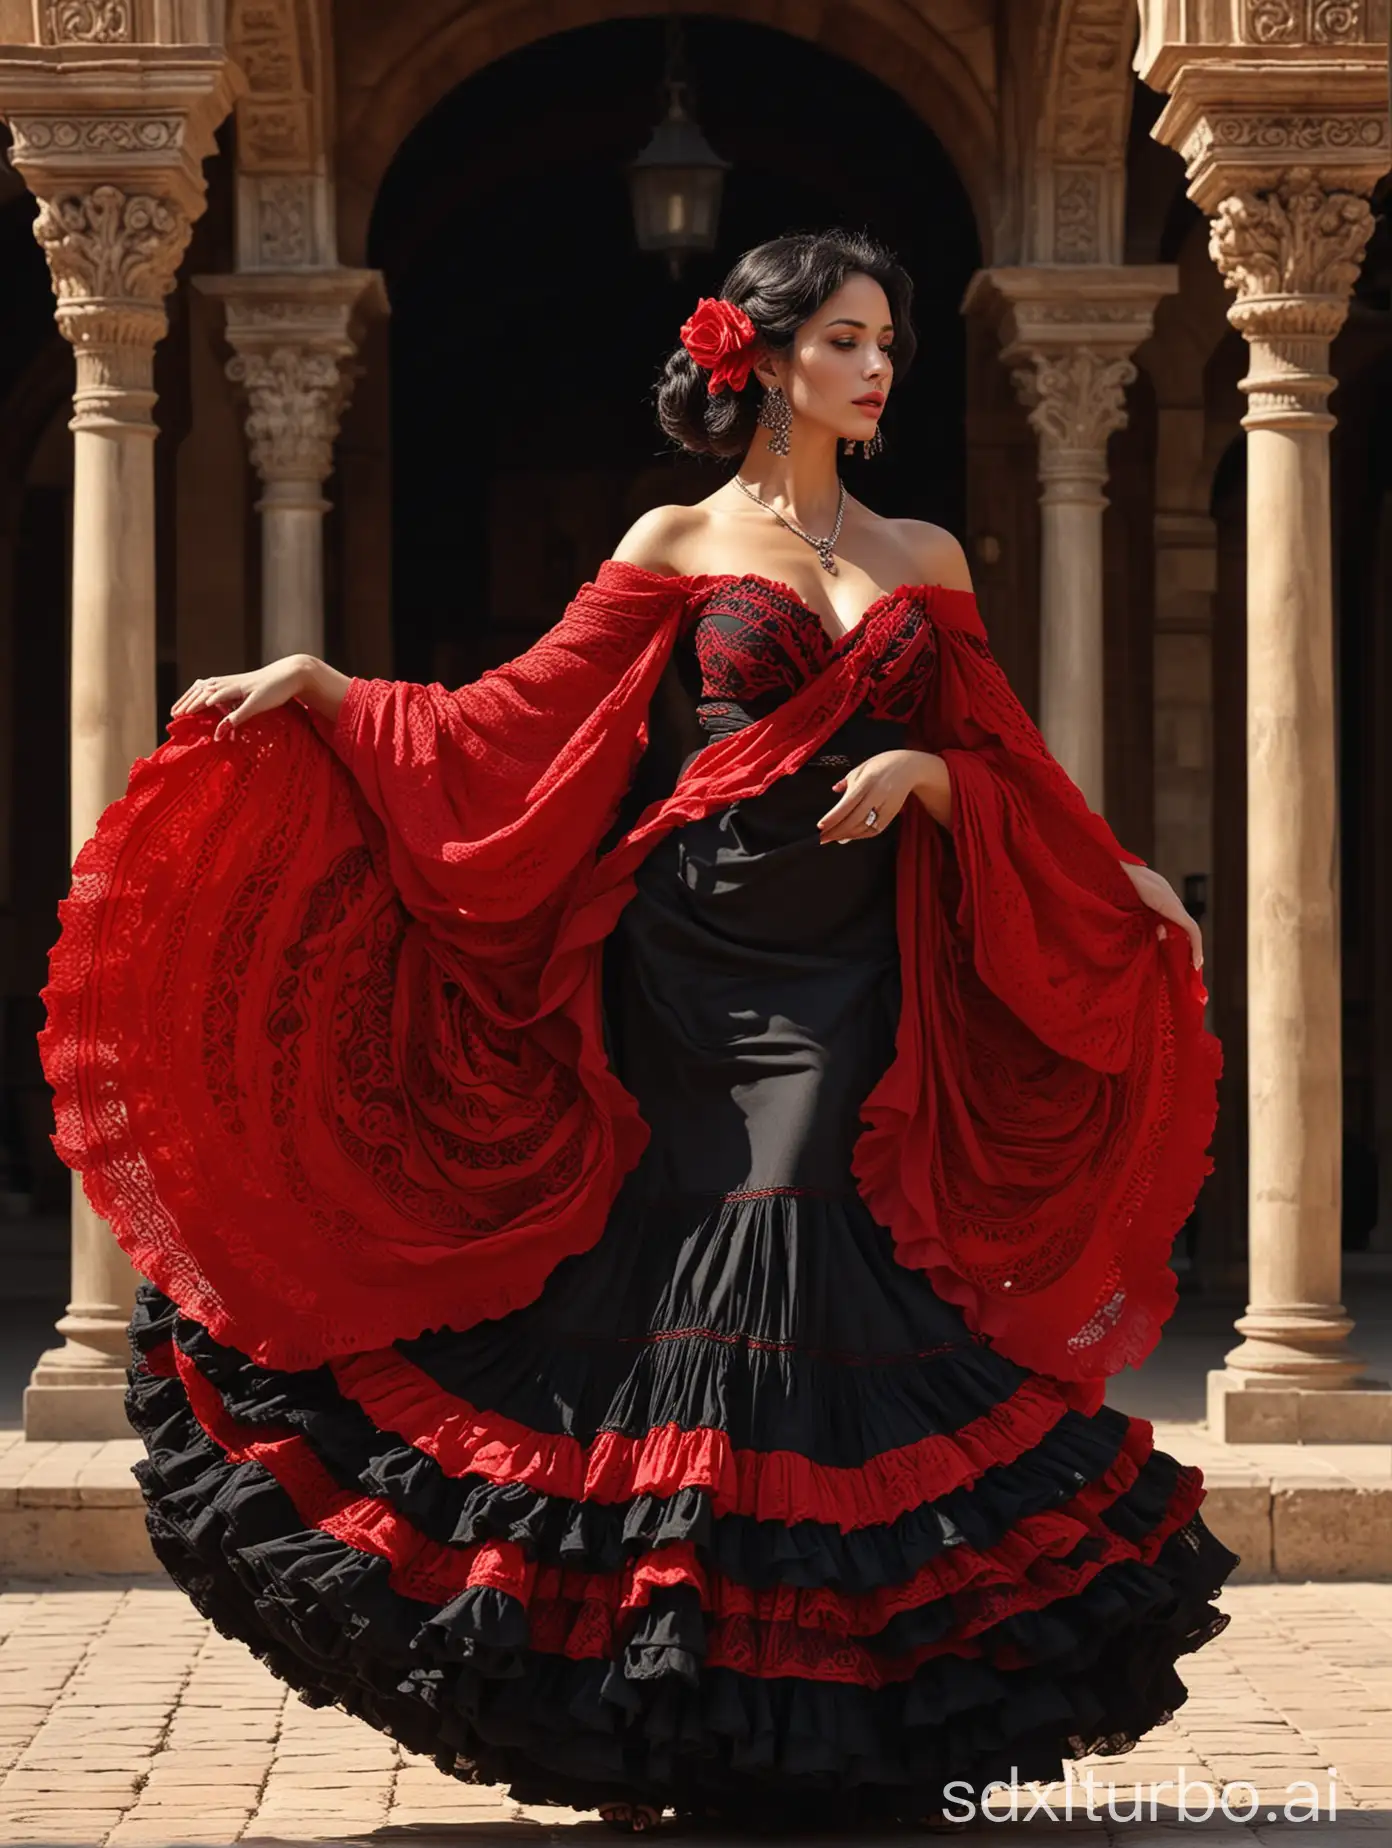 (beautiful woman, dancing flamenco)::4 intricate giant earrings, black hair, very long dress::3 huge shawl, bata de cola, frills and flounces, red-black palette :: Mudéjar style, Romanesque architecture in background, dancing pose :: portrait::-2 passion, grace, emotional, epic composition, tribal darkfantasy, dramatic shadows :: by Fabian Perez